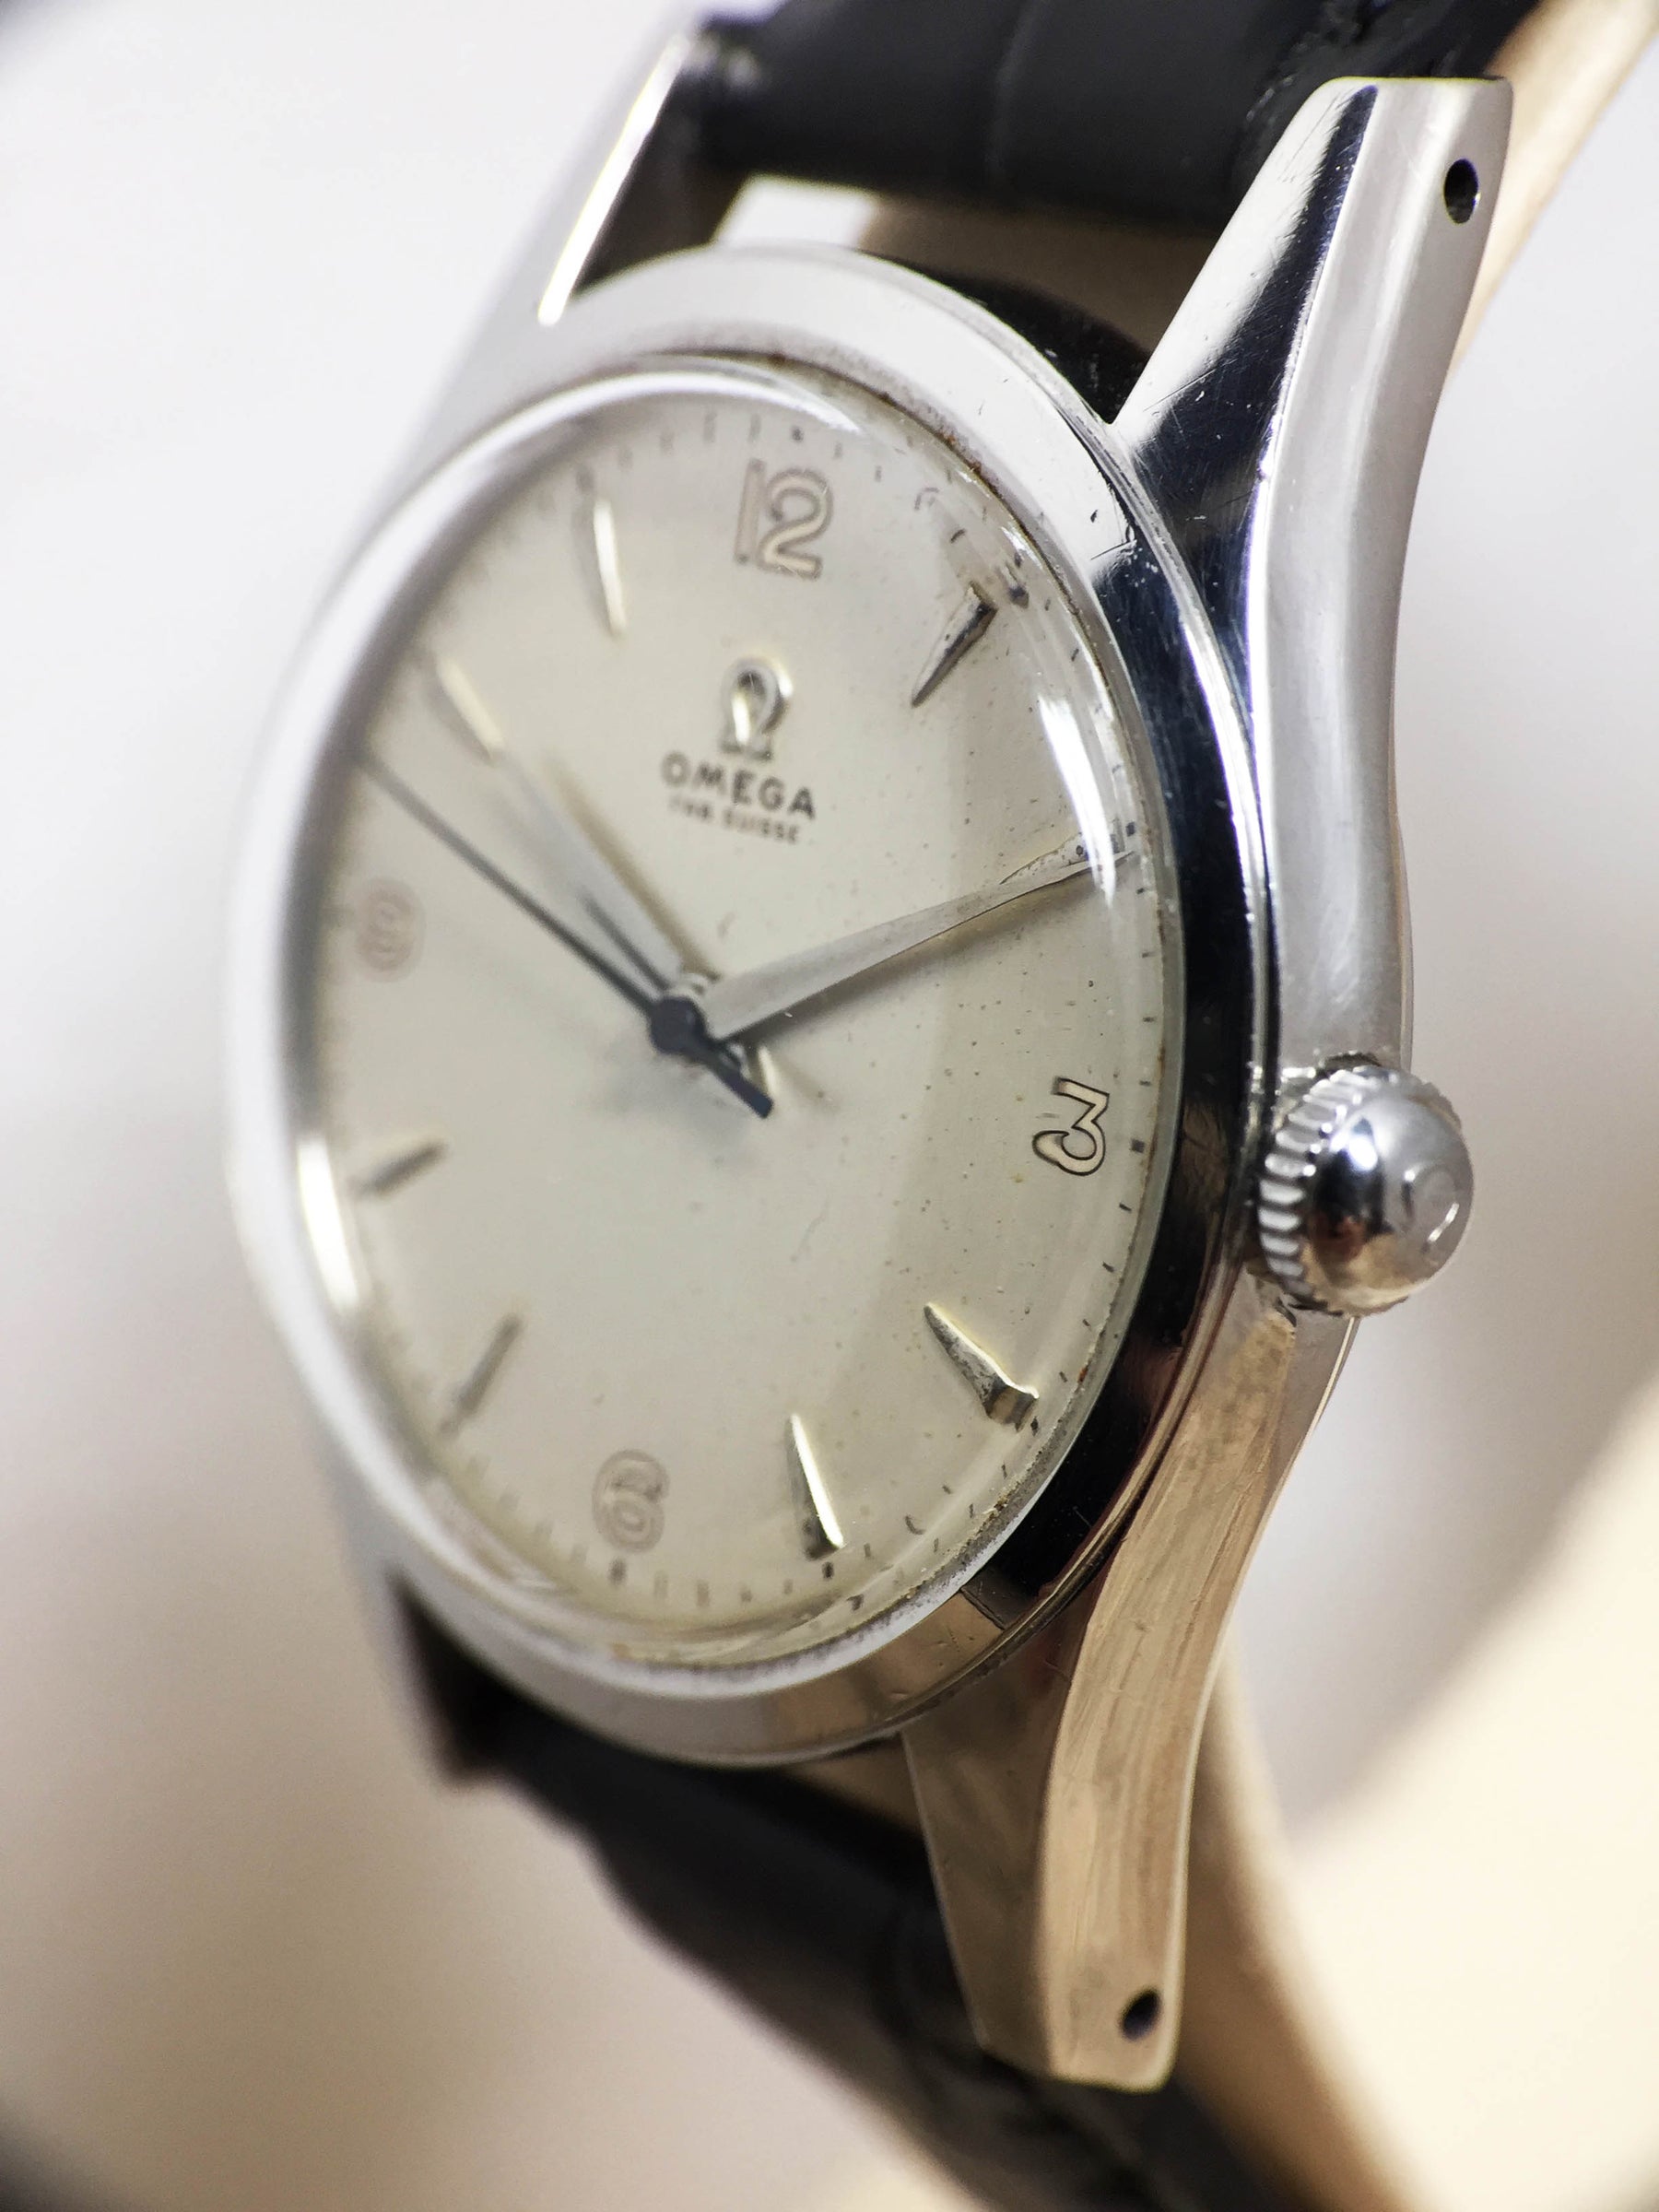 Omega Fab Suisse Ref. 2537-4 Year 1948